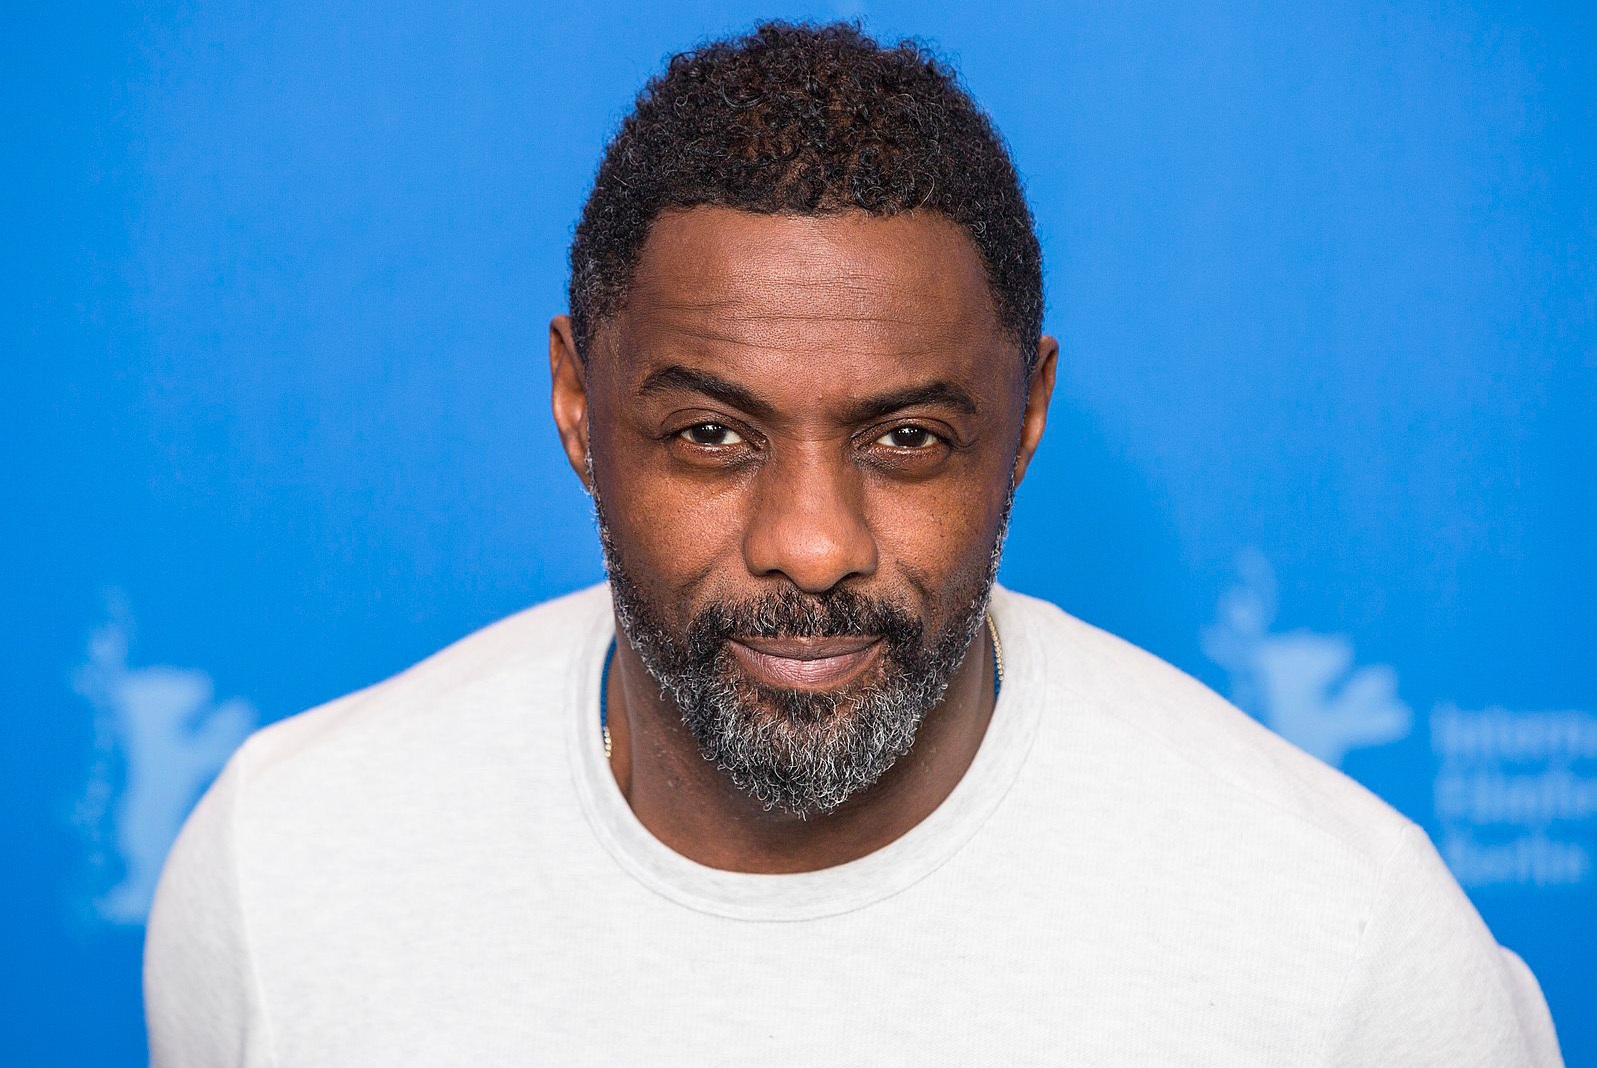 Snoddy: There's more to this C4 story than Idris Elba